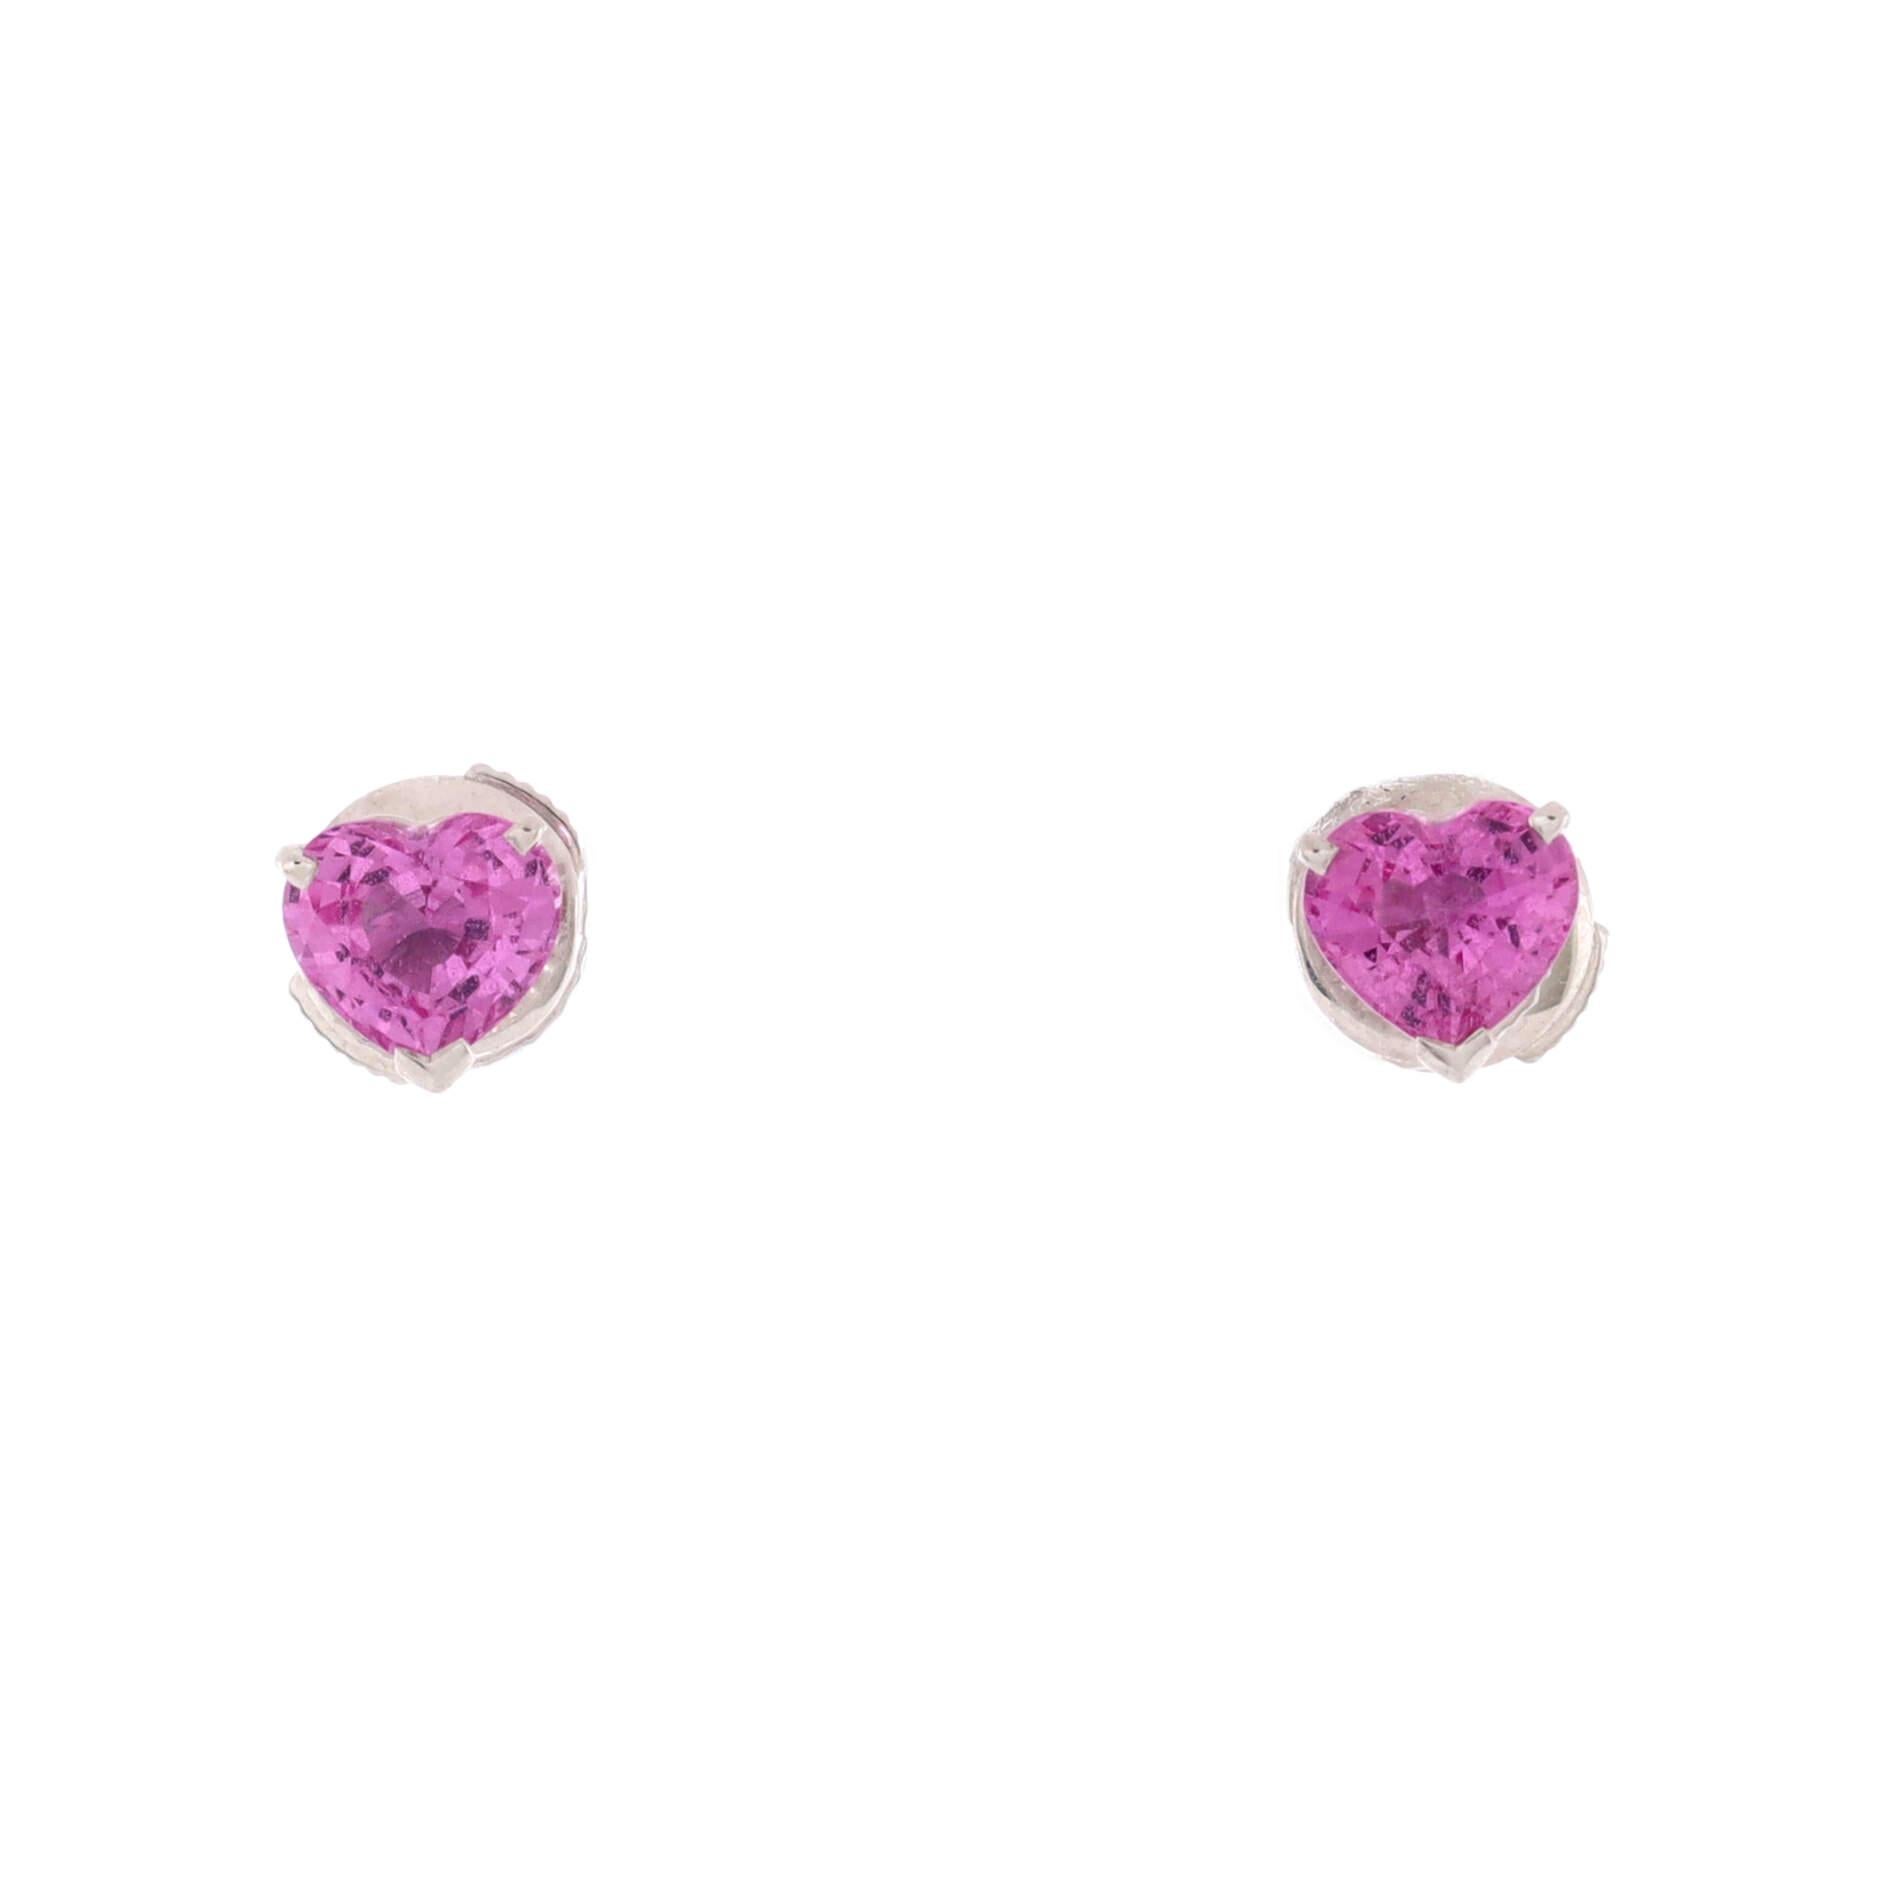 Condition: Great. Minor wear throughout.
Accessories: No Accessories
Measurements: Height/Length: 5.55 mm, Width: 5.50 mm
Designer: Cartier
Model: Heart Stud Earrings 18K White Gold with Pink Sapphires
Exterior Color: White Gold
Item Number: 191811/4